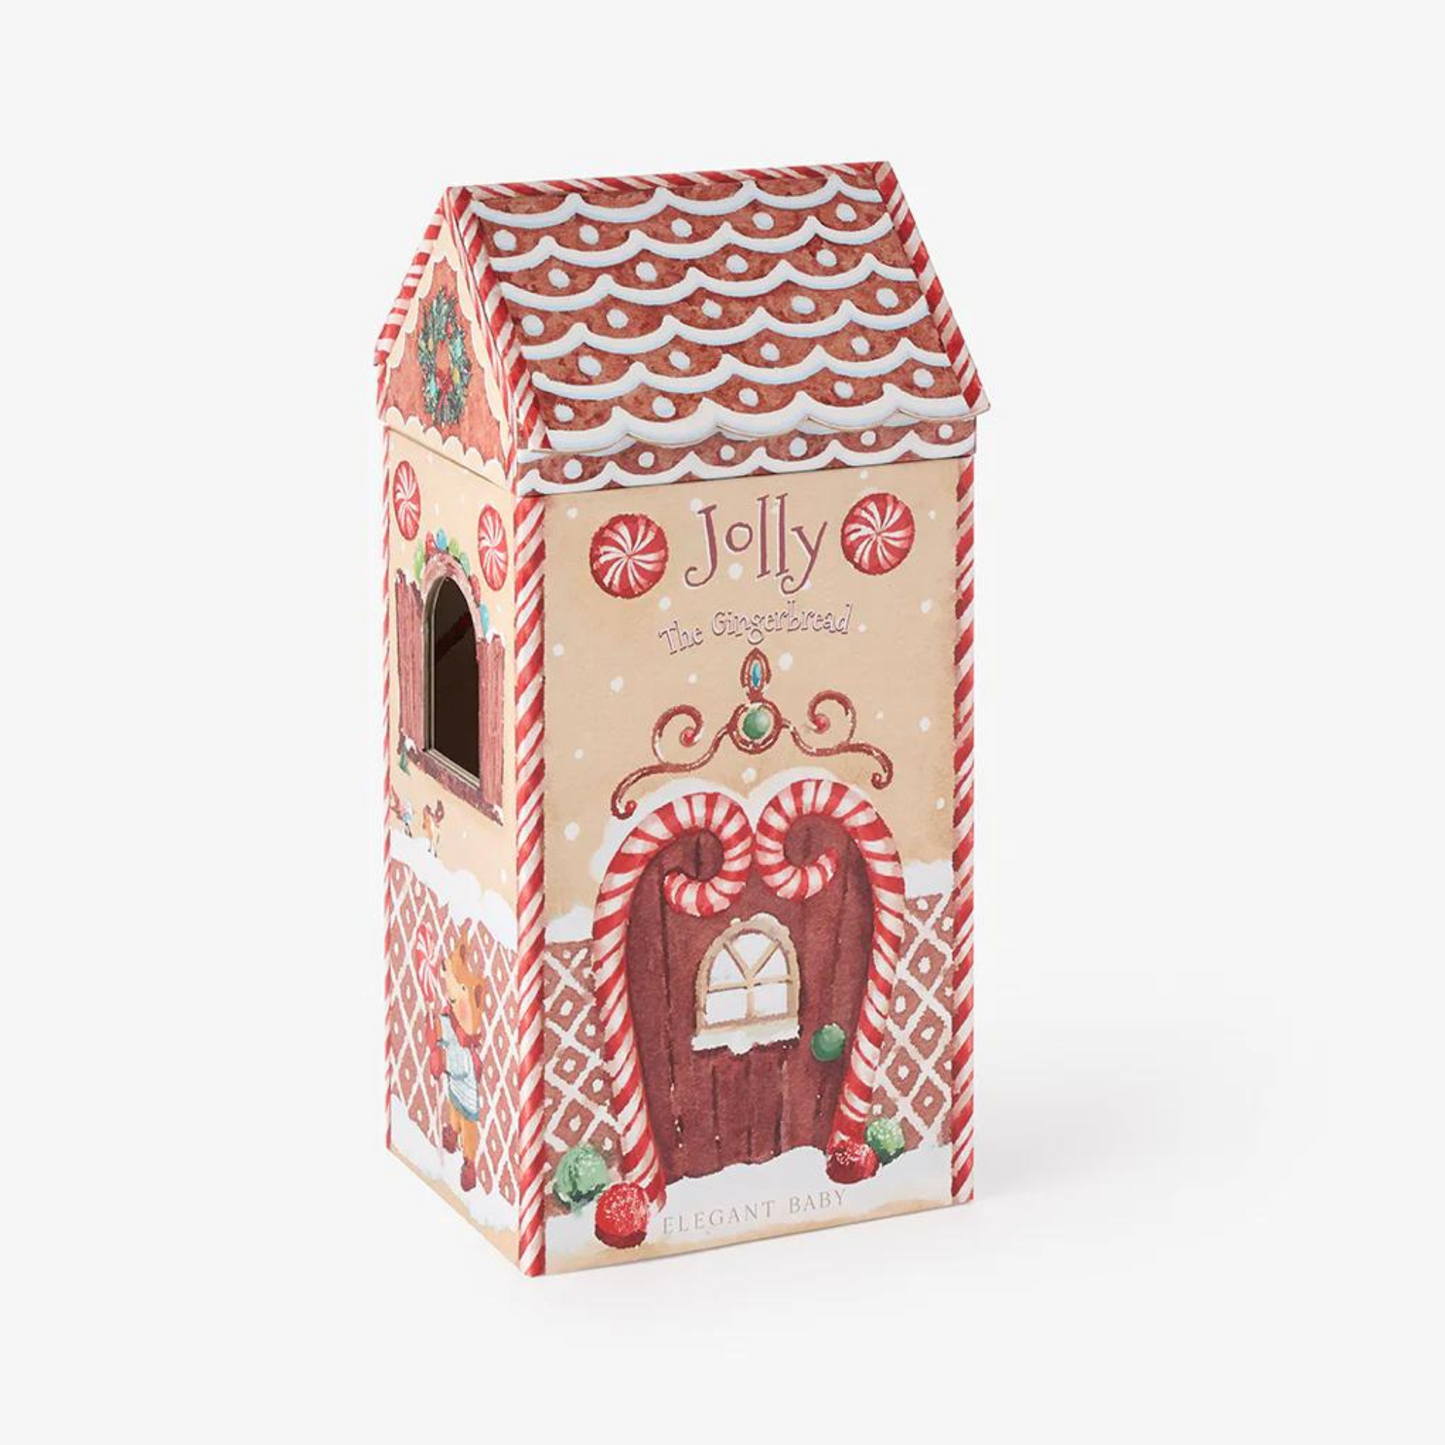 Jolly Gingerbread Knit Toy in Gift Box